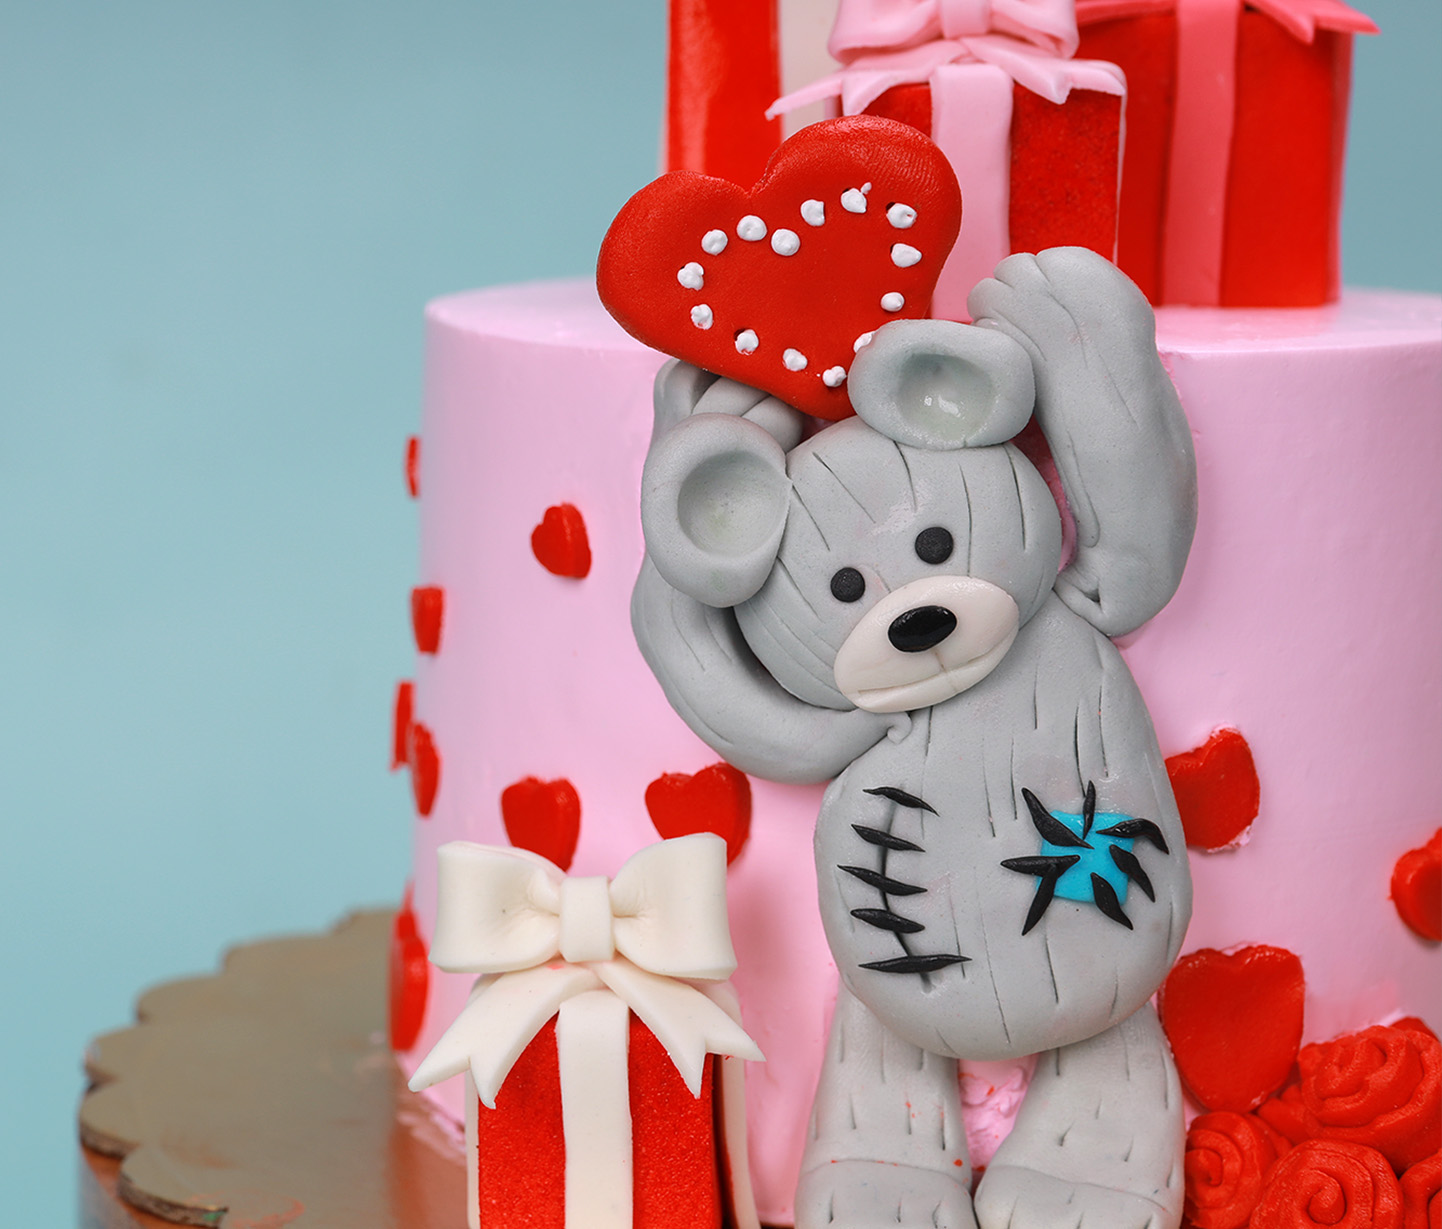 Buy or Order First Birthday Cake Online | Midnight Gifts Online -  OyeGifts.com